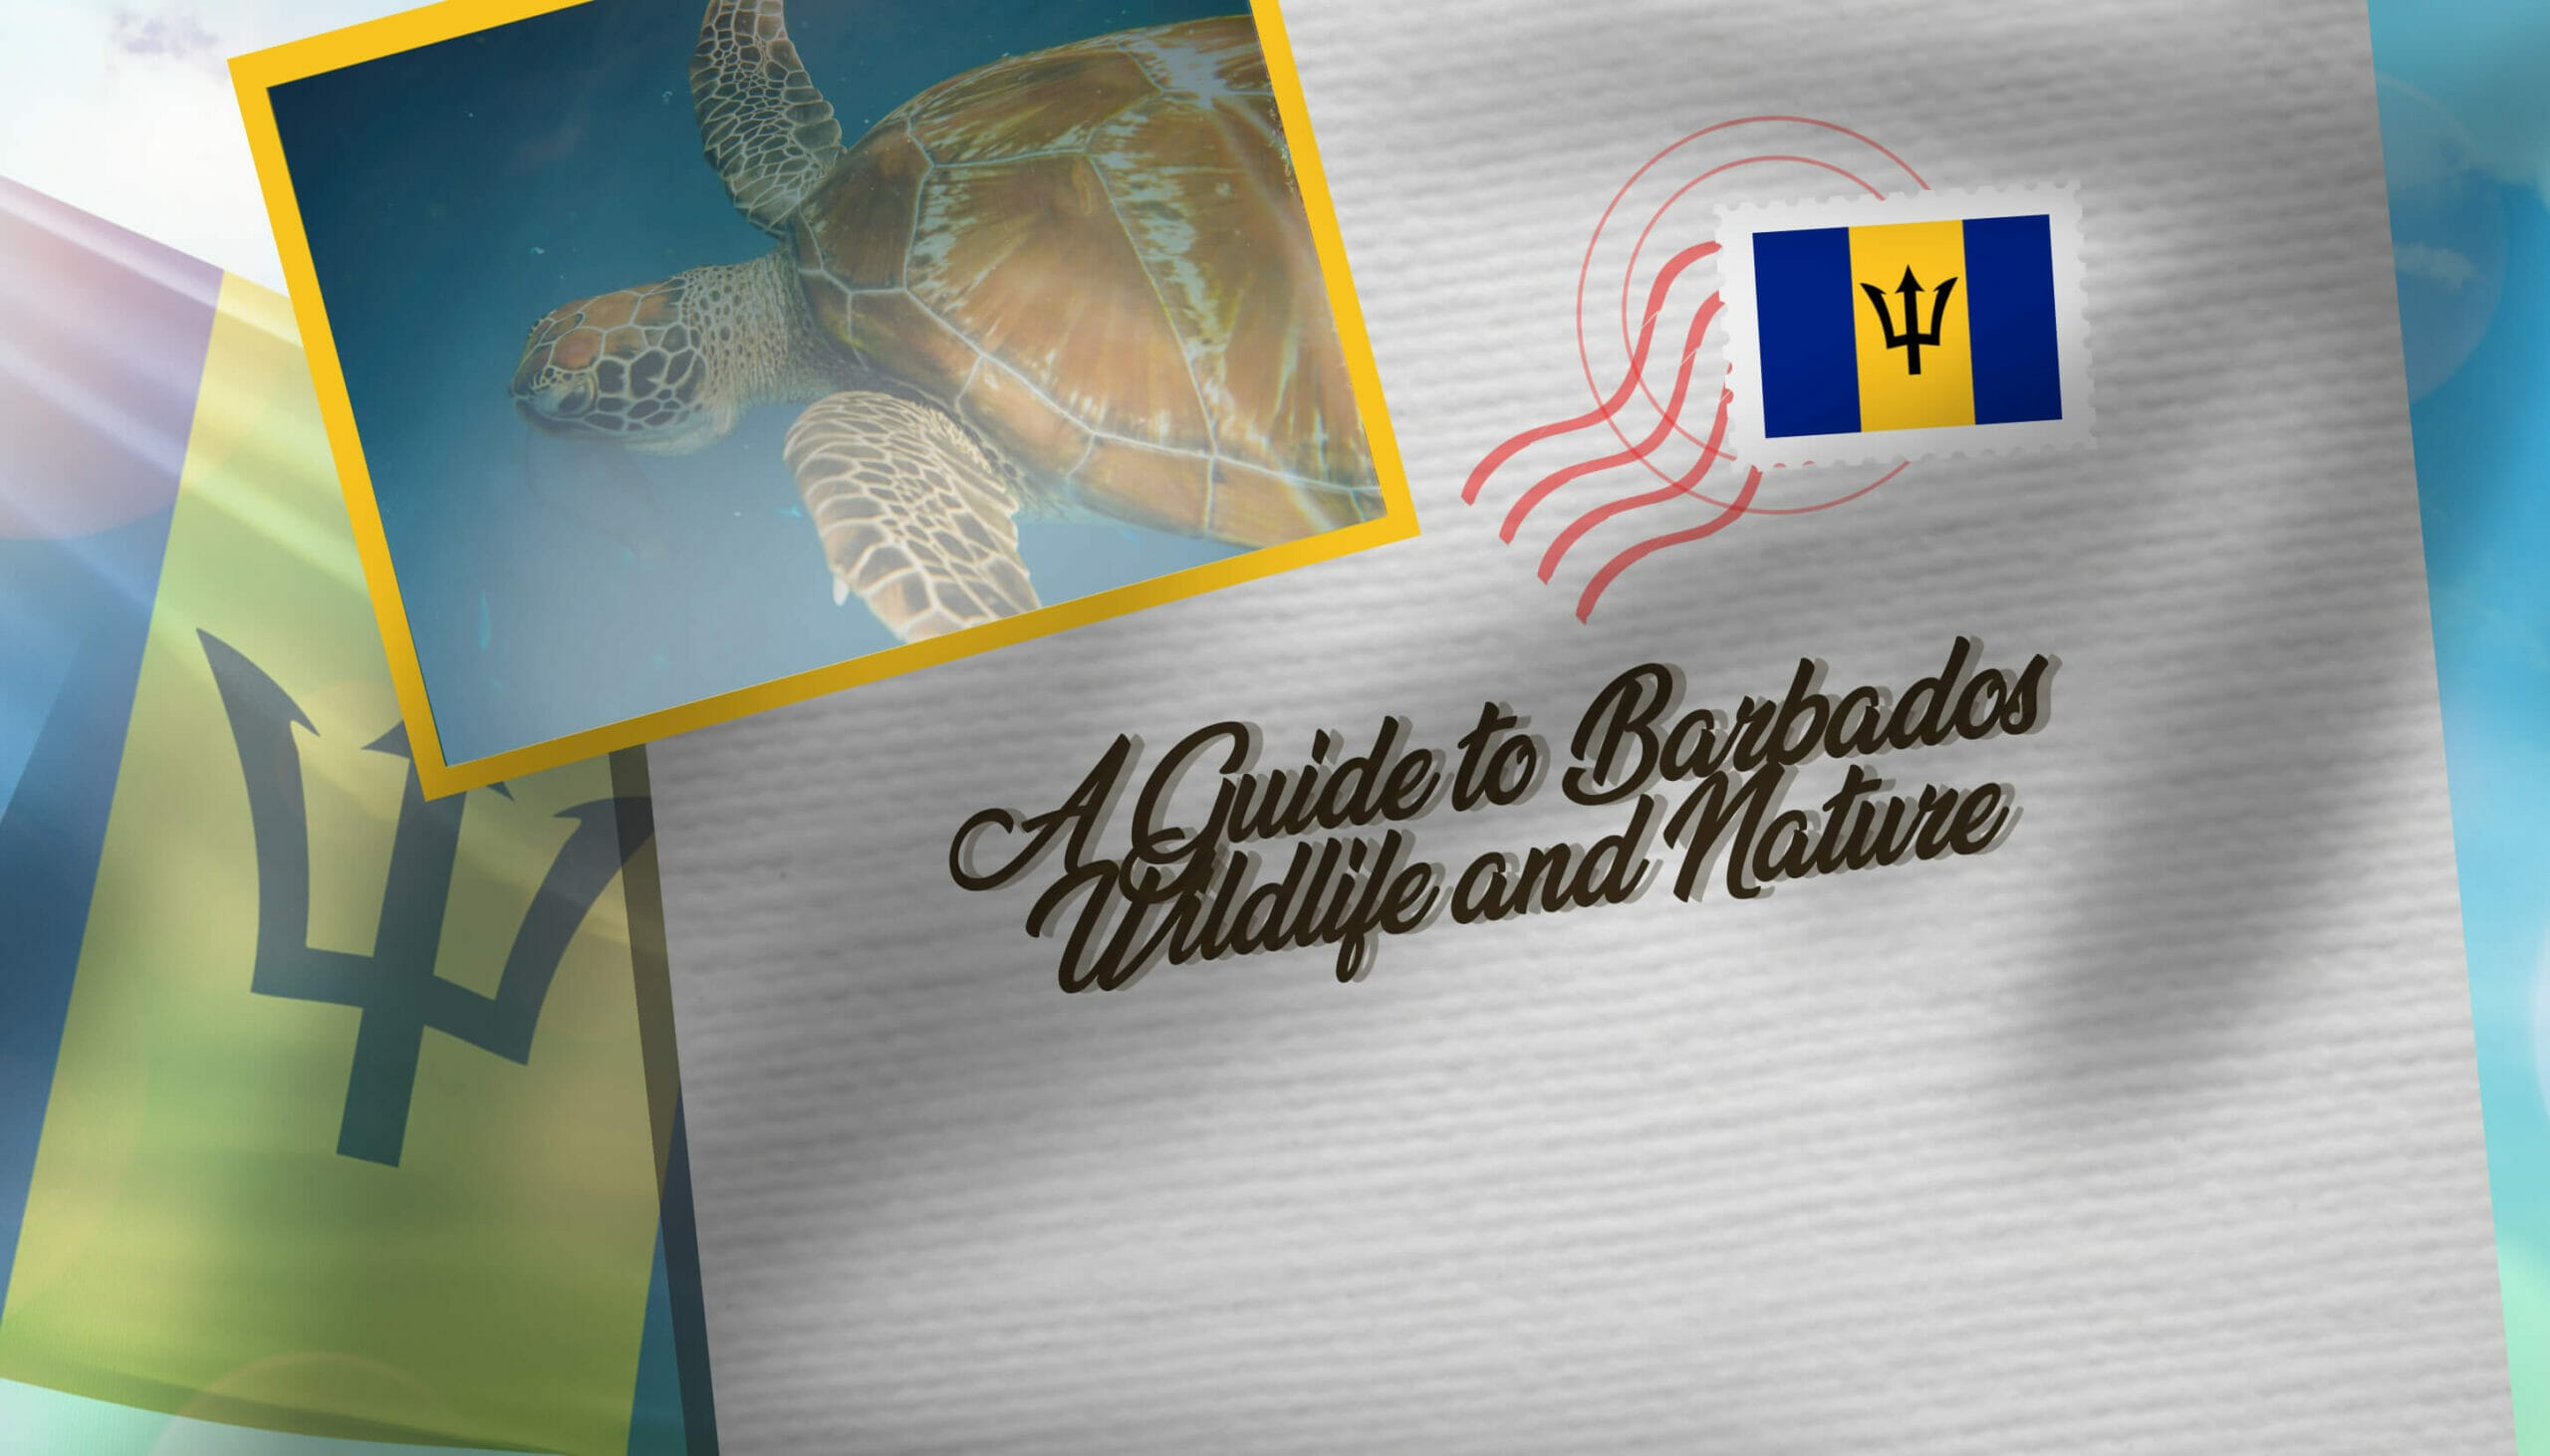 A Guide to Barbados Wildlife and Nature